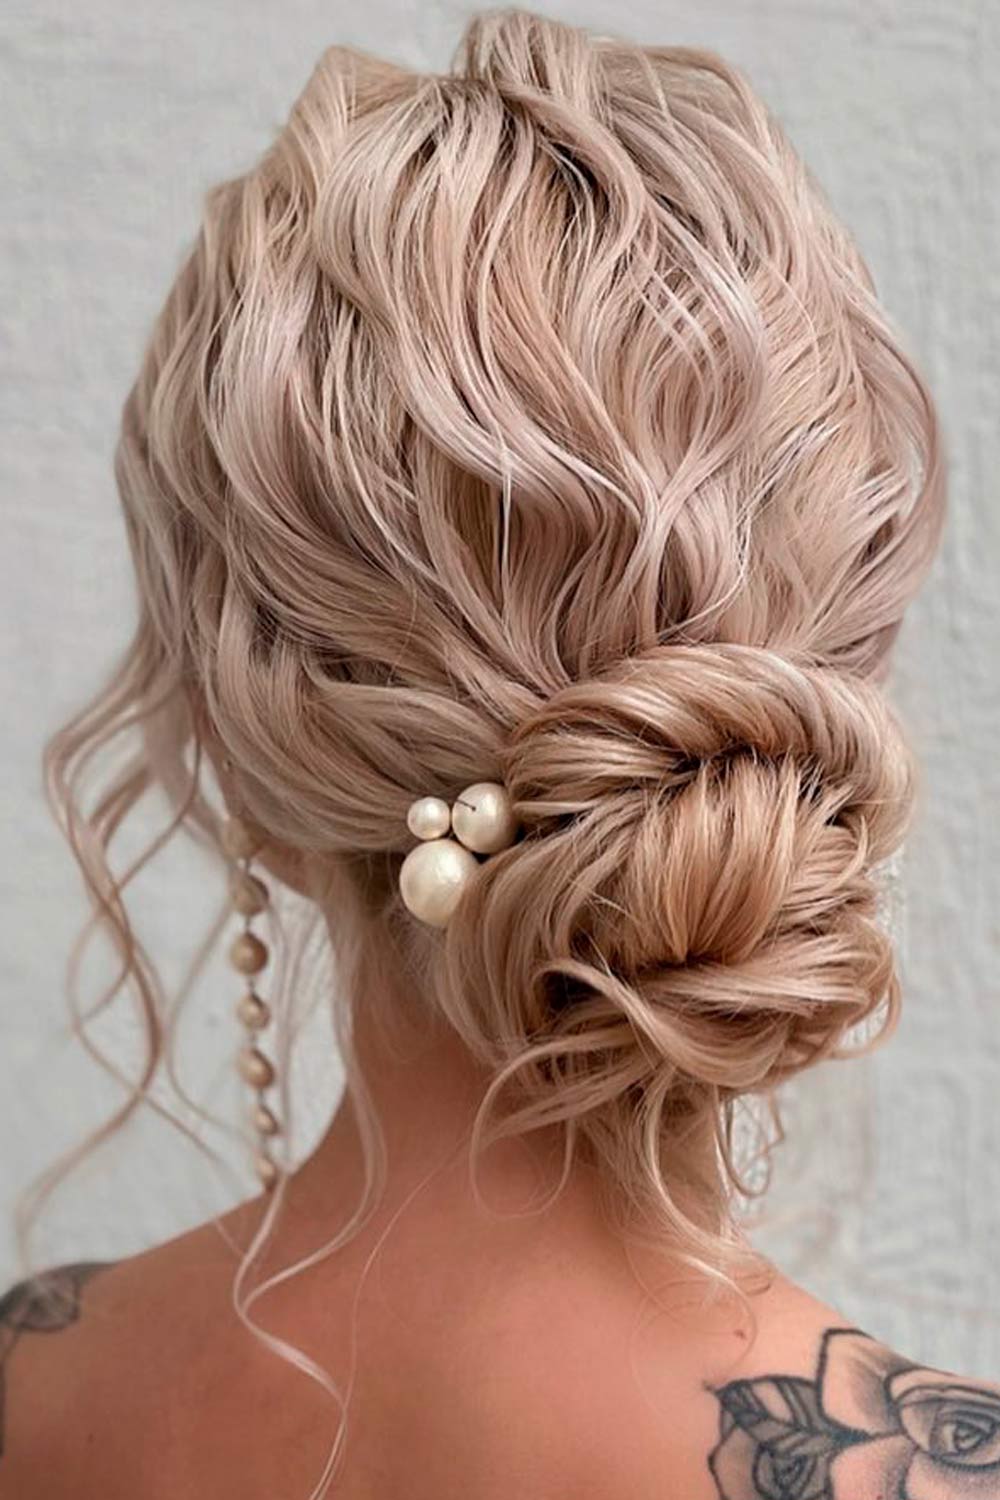 Amazing Updo Hairstyles For Long Hair